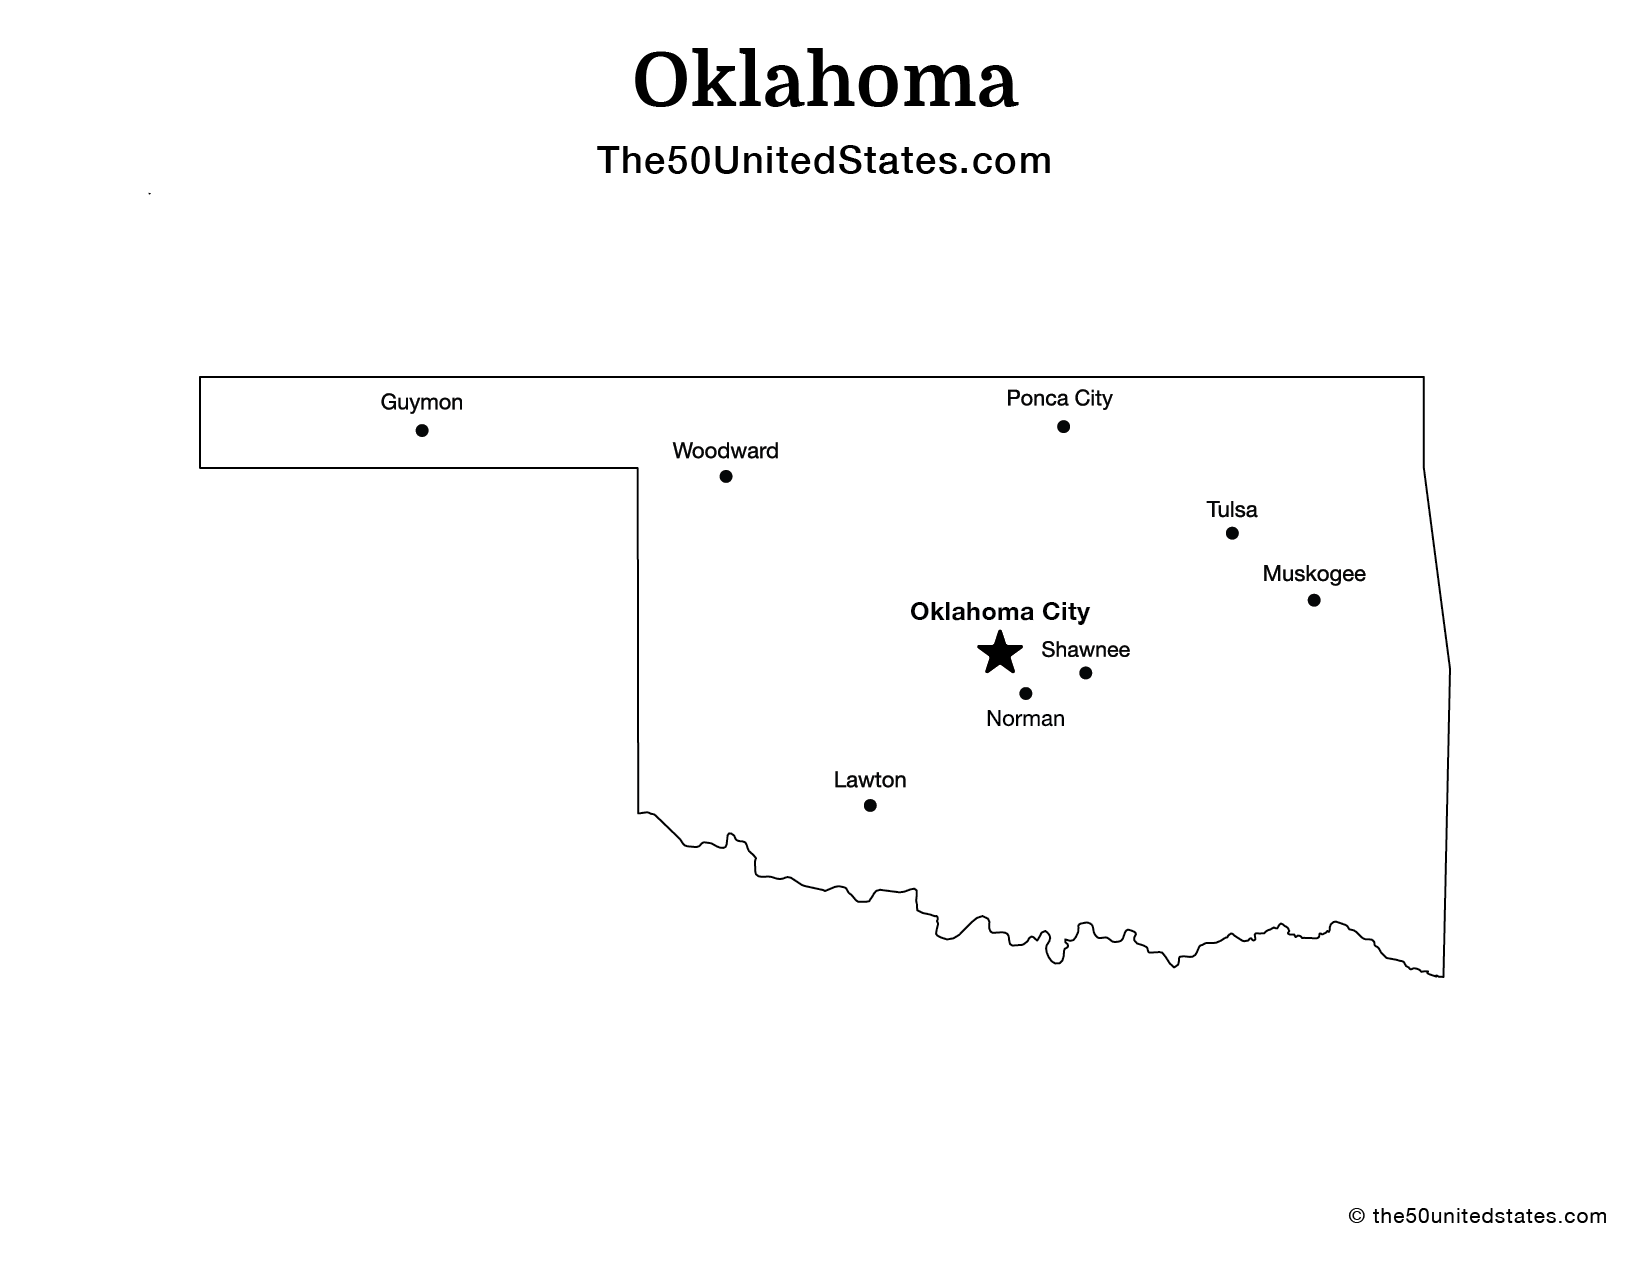 Map of Oklahoma with Cities (Labeled)